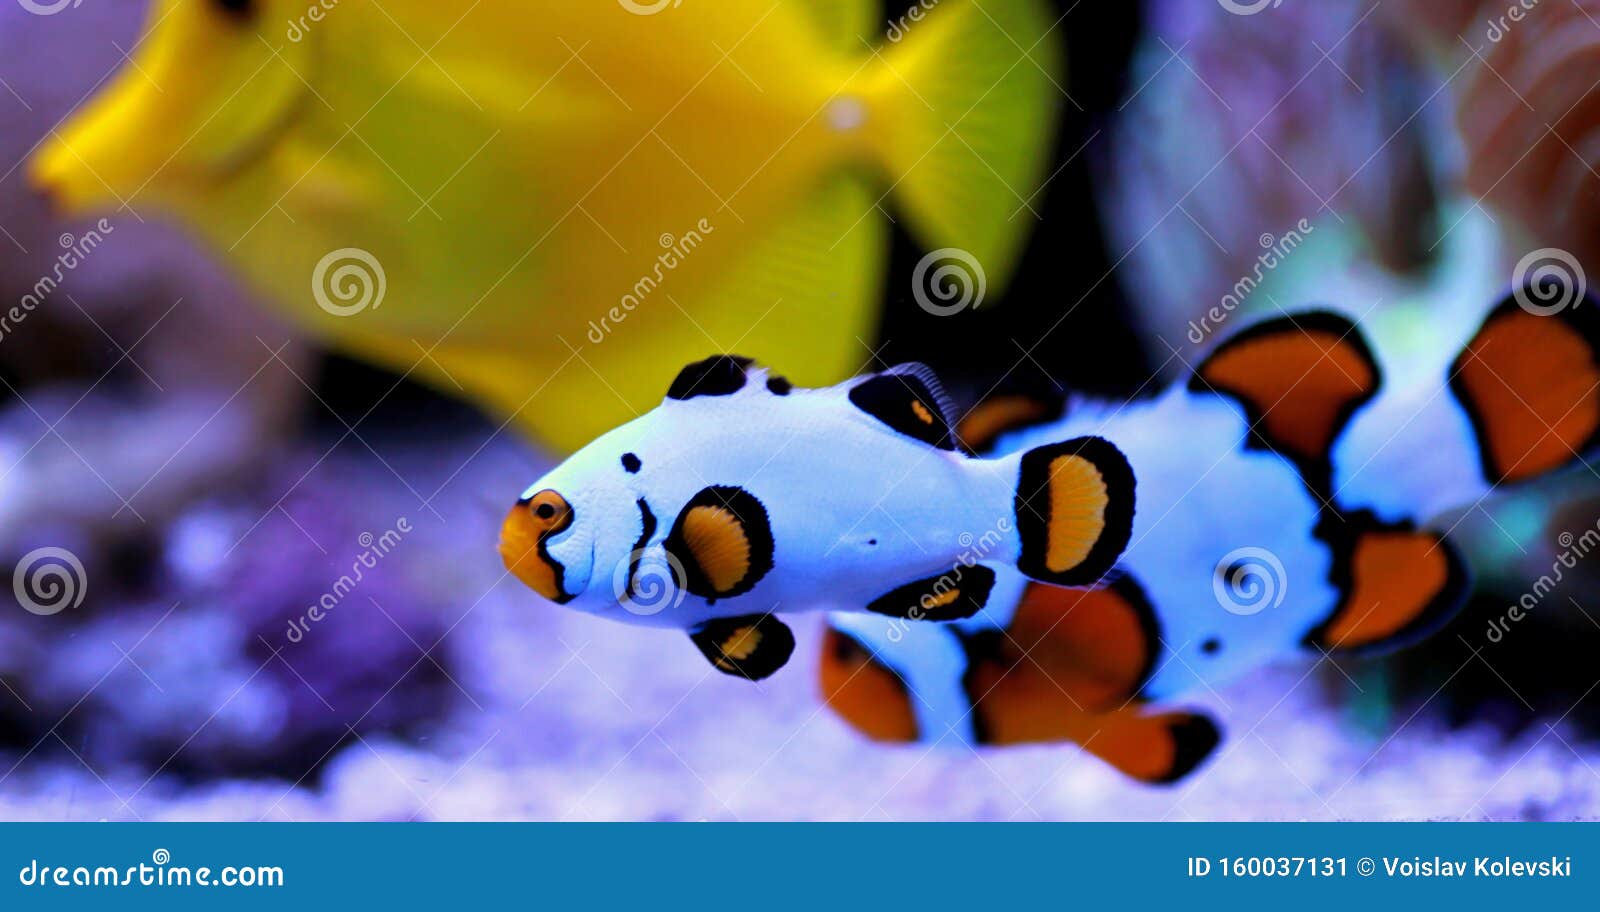 Premium Black Ice Clownfish Amphiprion Ocellaris Stock Image Image Of Environment Amphiprion